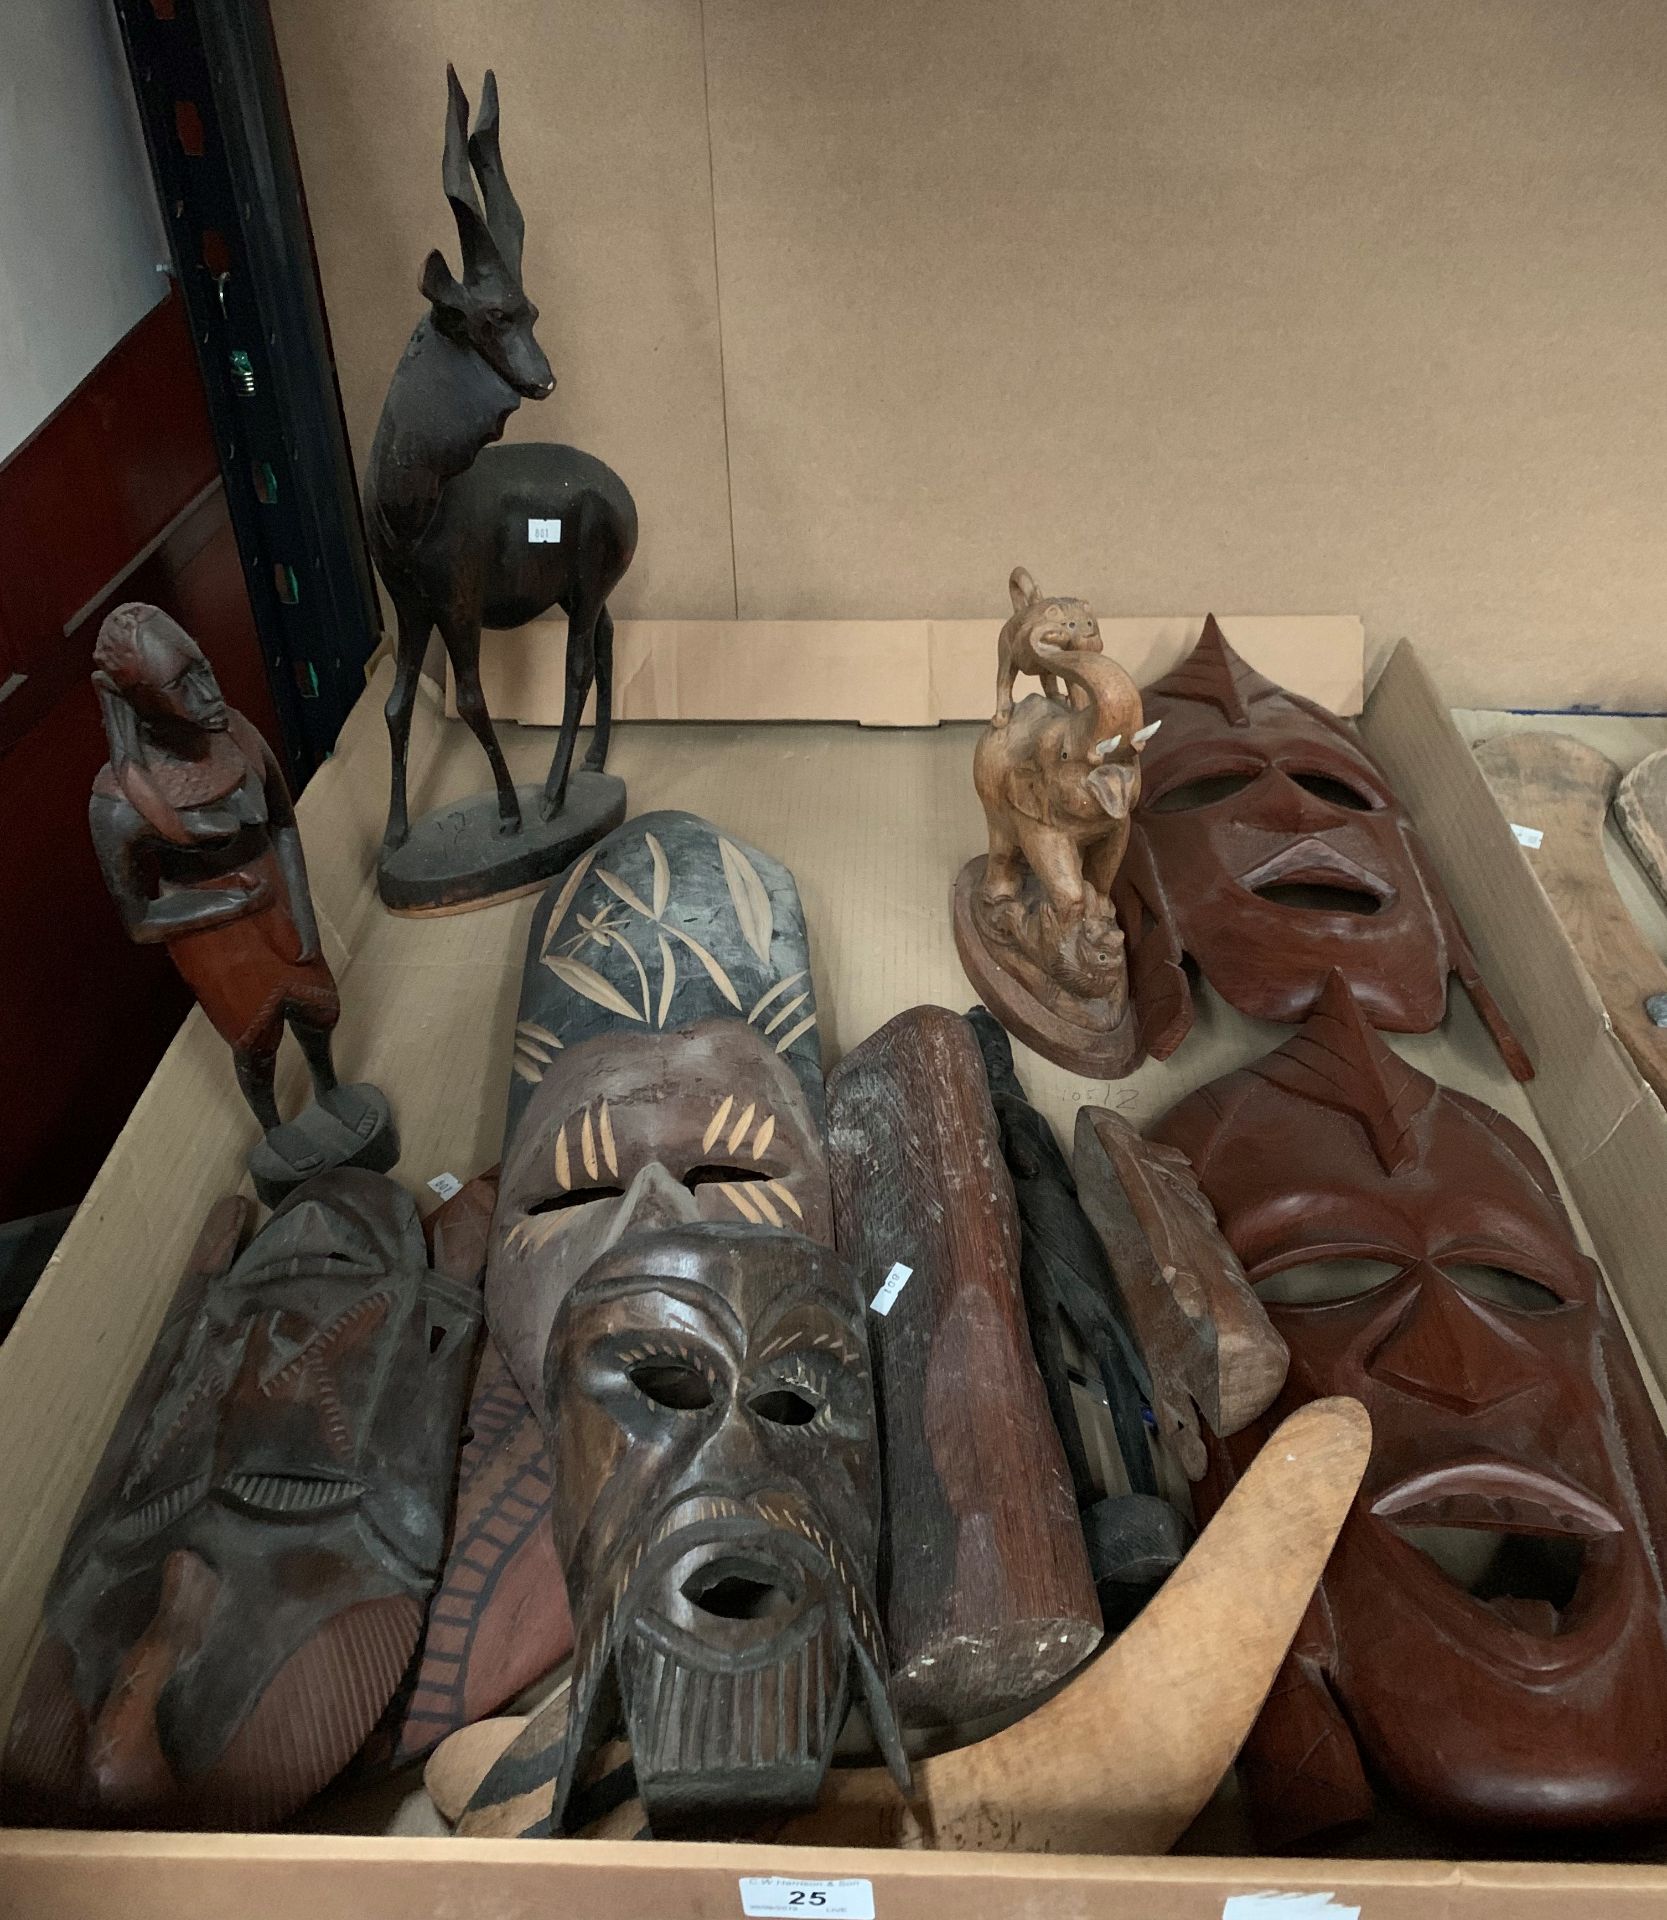 Contents to tray - wood wall masks, carved wood animals etc.